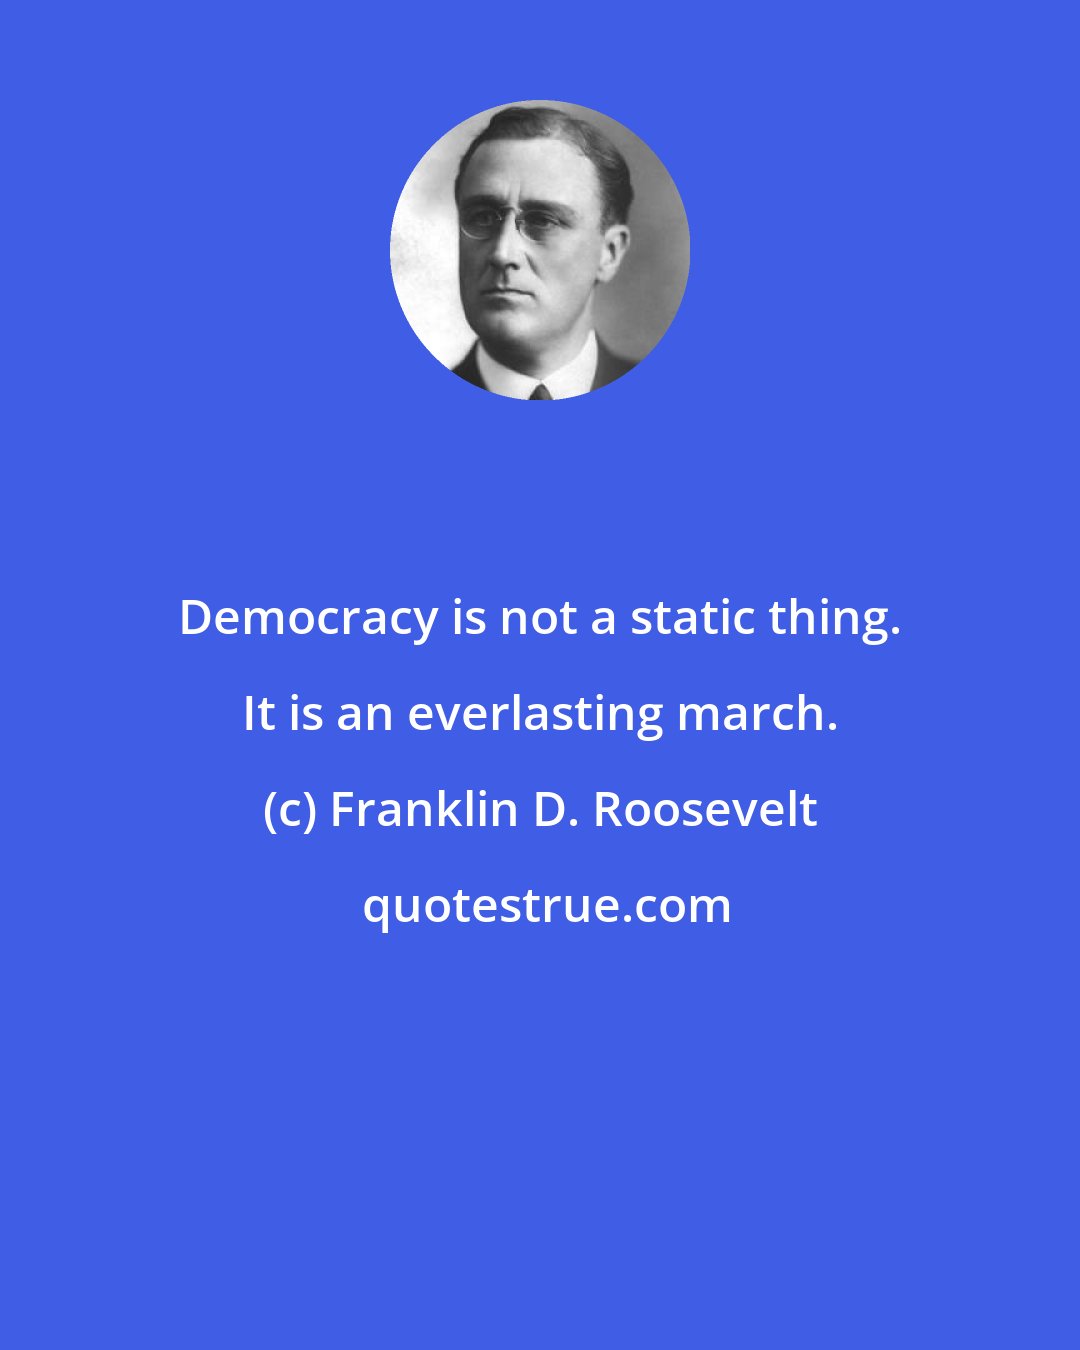 Franklin D. Roosevelt: Democracy is not a static thing. It is an everlasting march.